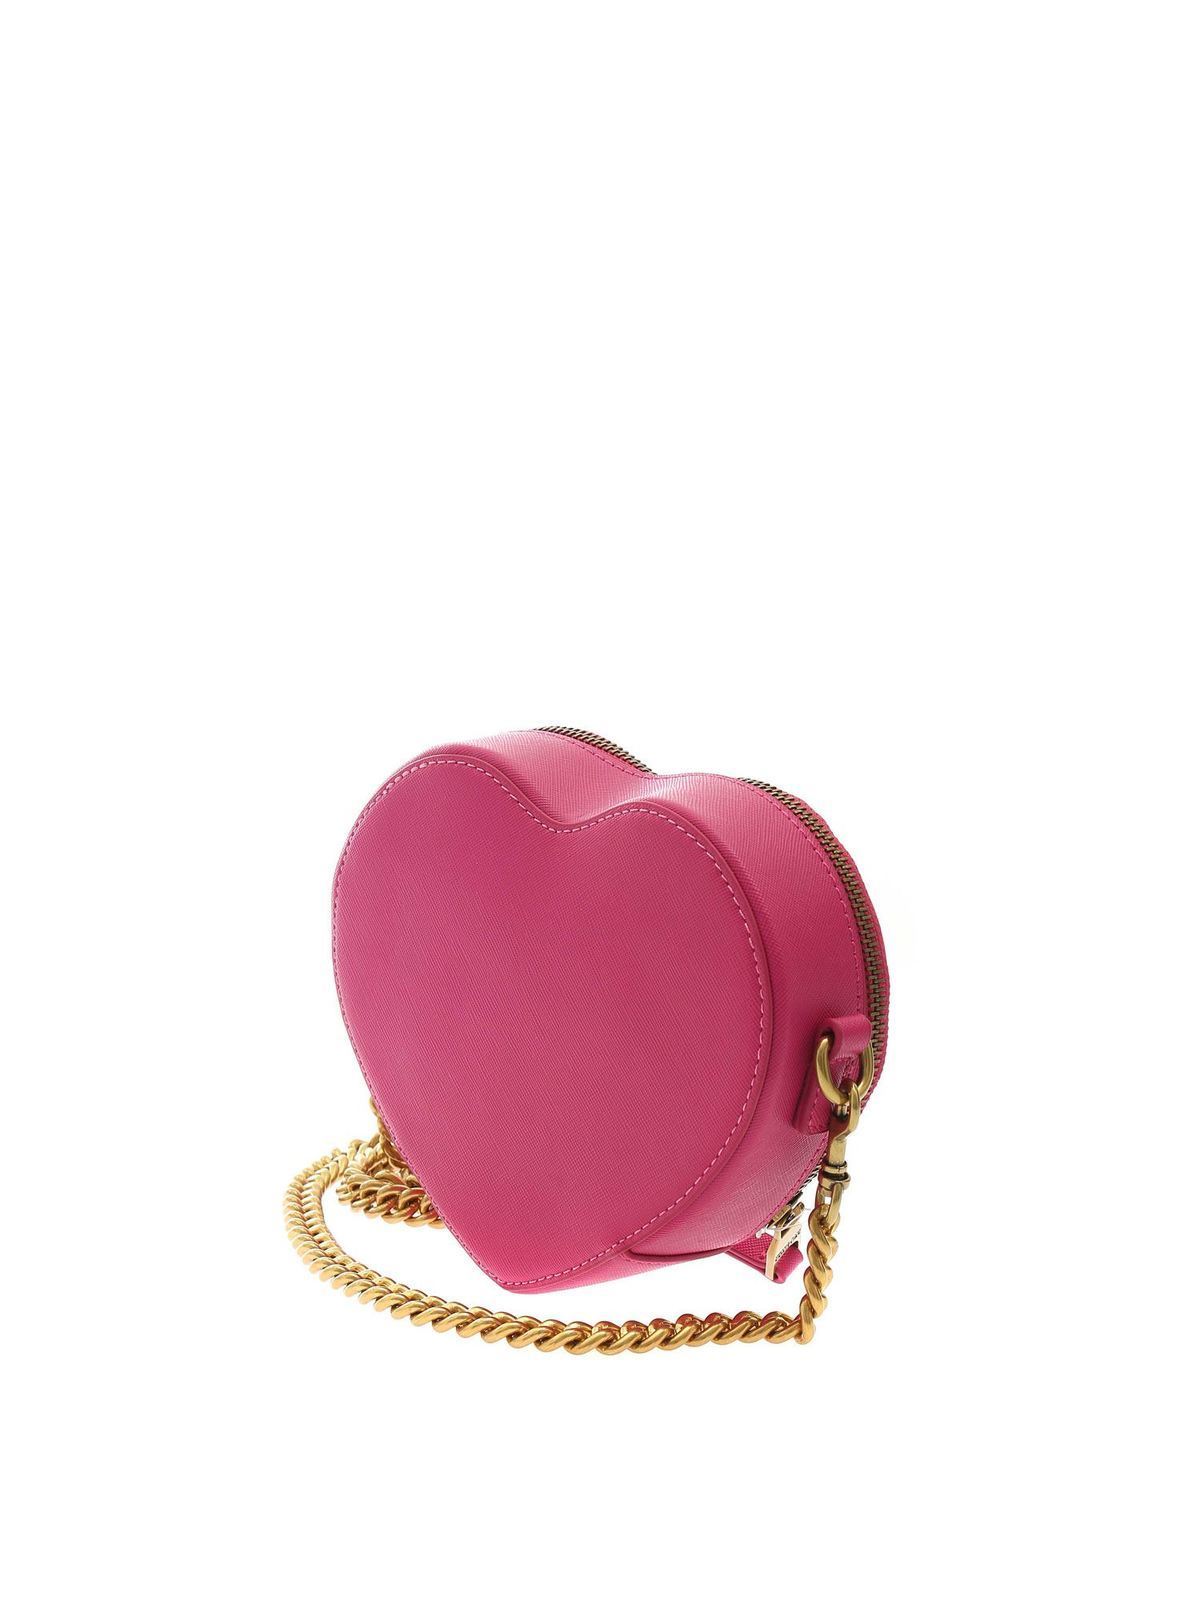 Versace Jeans Couture heart-shaped Crossbody Bag - Farfetch